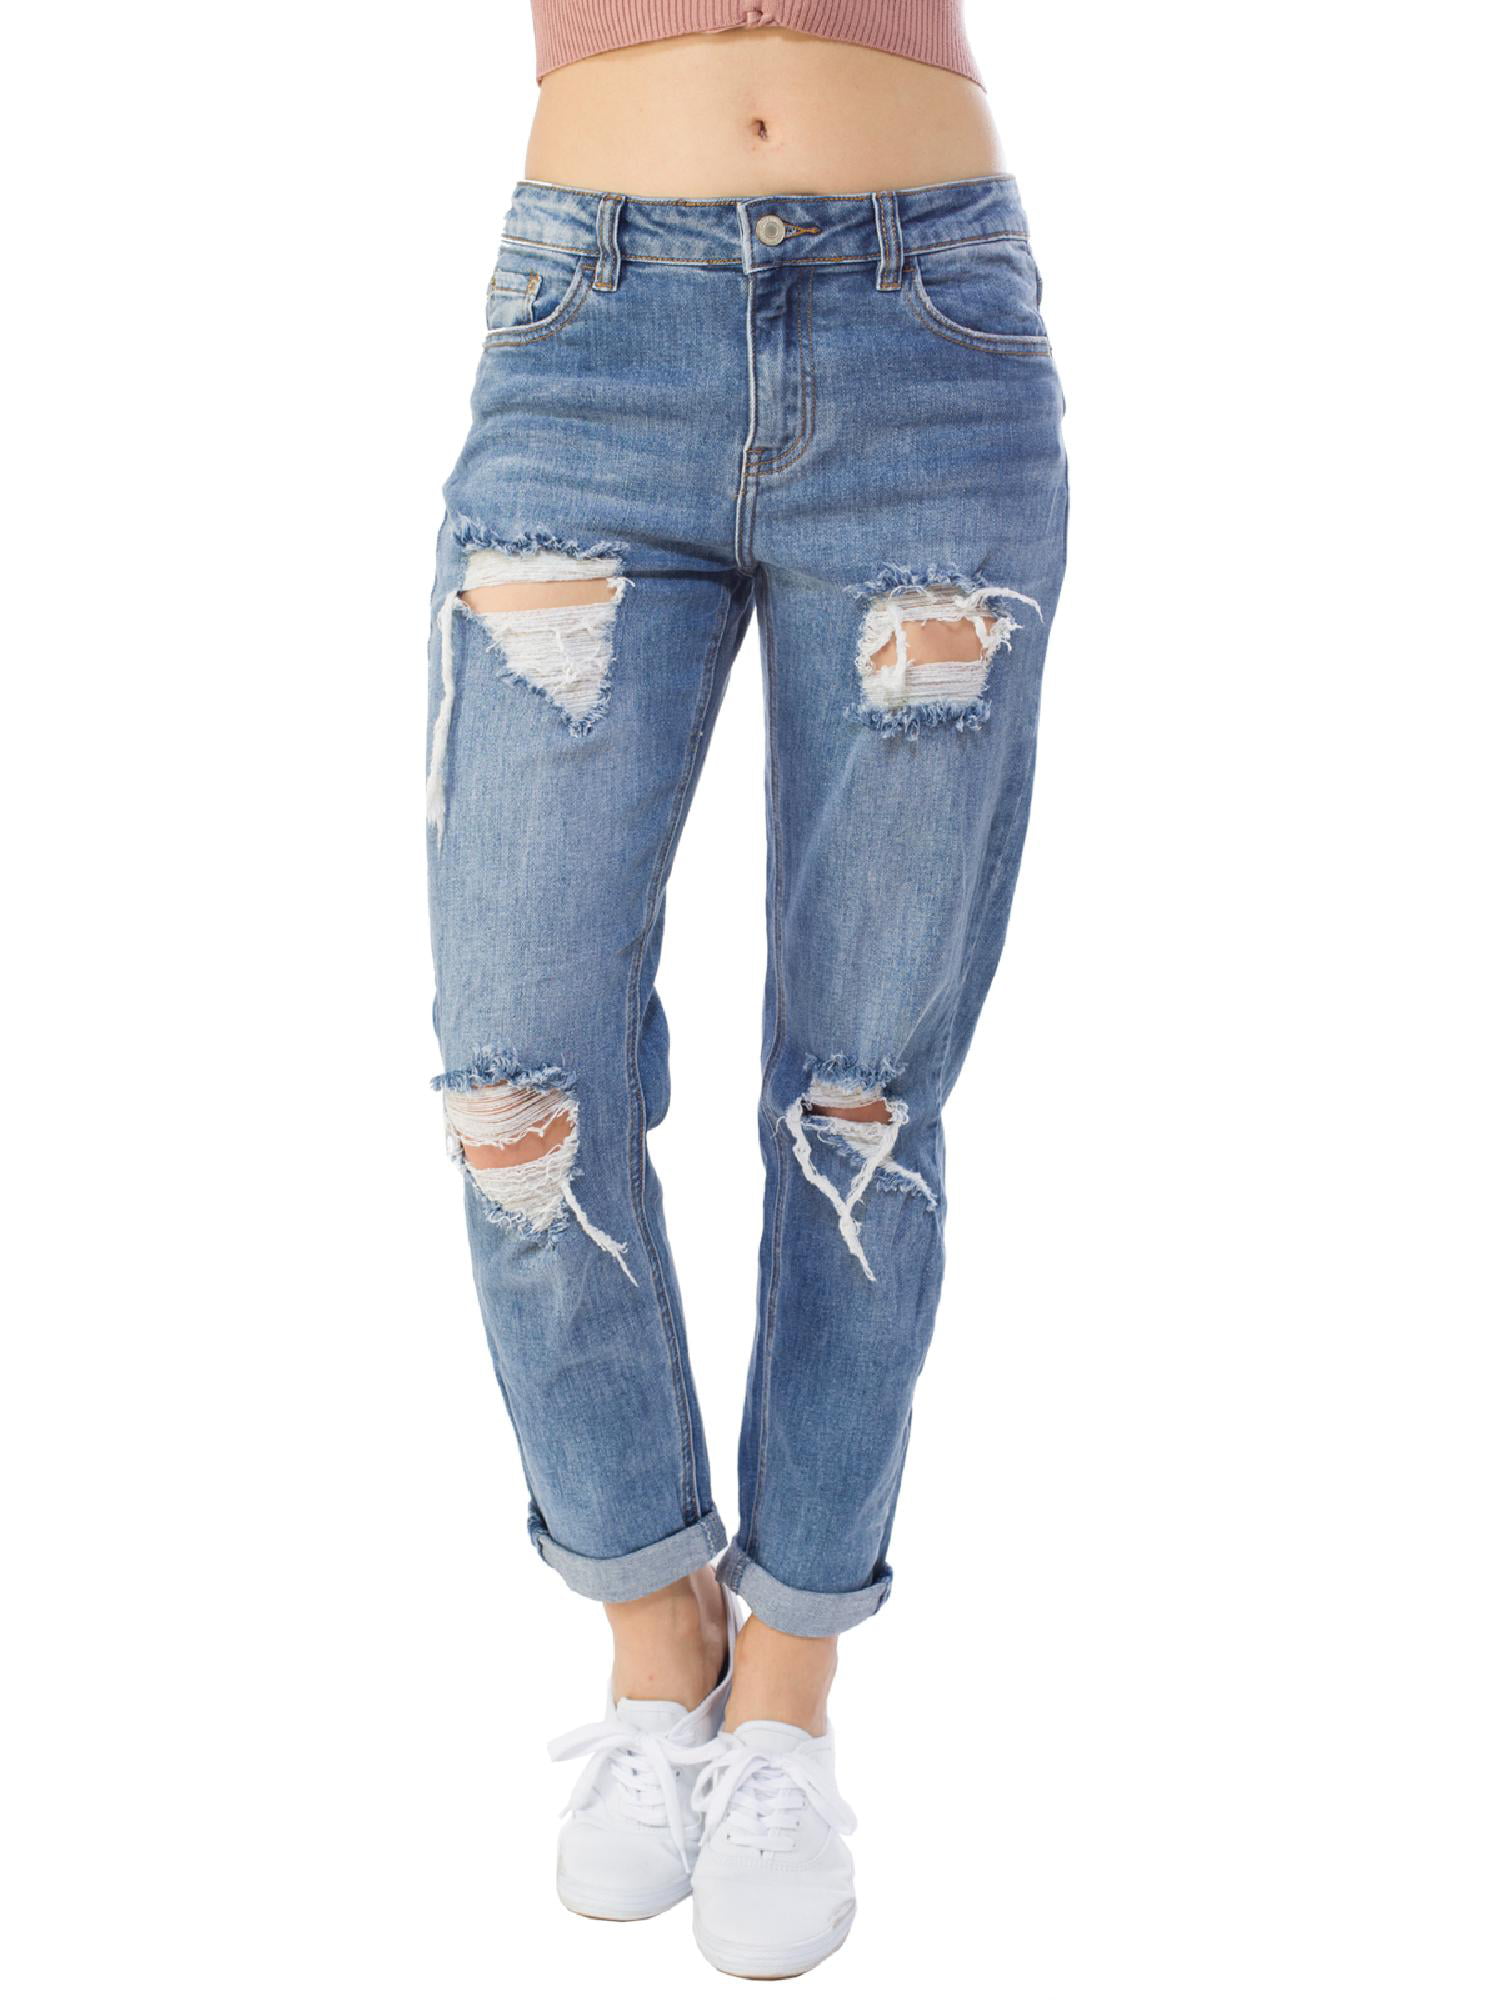 MixMatchy Women's Mid Rise Distressed Front and Back Boyfriend Jeans 